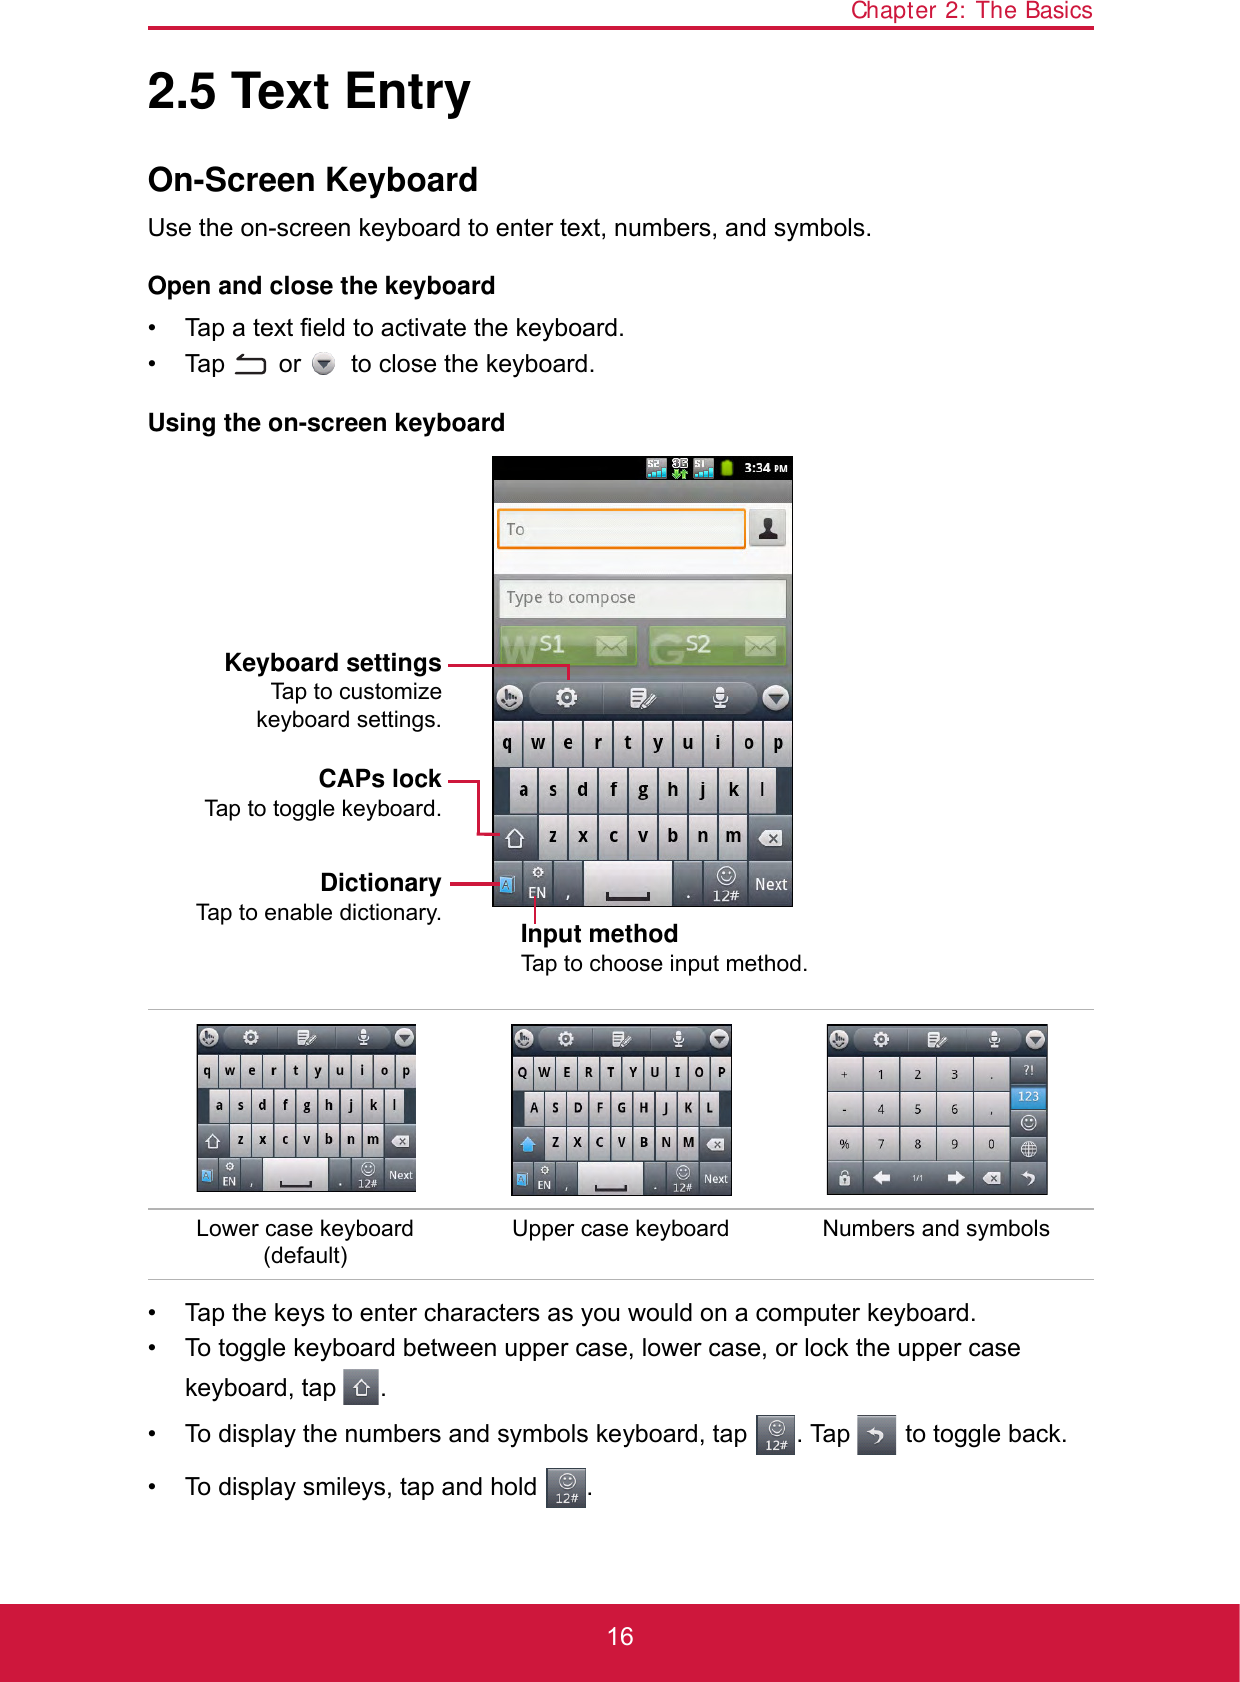 Chapter 2: The Basics162.5 Text EntryOn-Screen KeyboardUse the on-screen keyboard to enter text, numbers, and symbols.Open and close the keyboard• Tap a text field to activate the keyboard.• Tap   or   to close the keyboard. Using the on-screen keyboard• Tap the keys to enter characters as you would on a computer keyboard.• To toggle keyboard between upper case, lower case, or lock the upper case keyboard, tap  . • To display the numbers and symbols keyboard, tap  . Tap   to toggle back.• To display smileys, tap and hold  .Lower case keyboard (default)Upper case keyboard Numbers and symbolsCAPs lockTap to toggle keyboard.DictionaryTap to enable dictionary. Input methodTap to choose input method.Keyboard settingsTap to customizekeyboard settings.